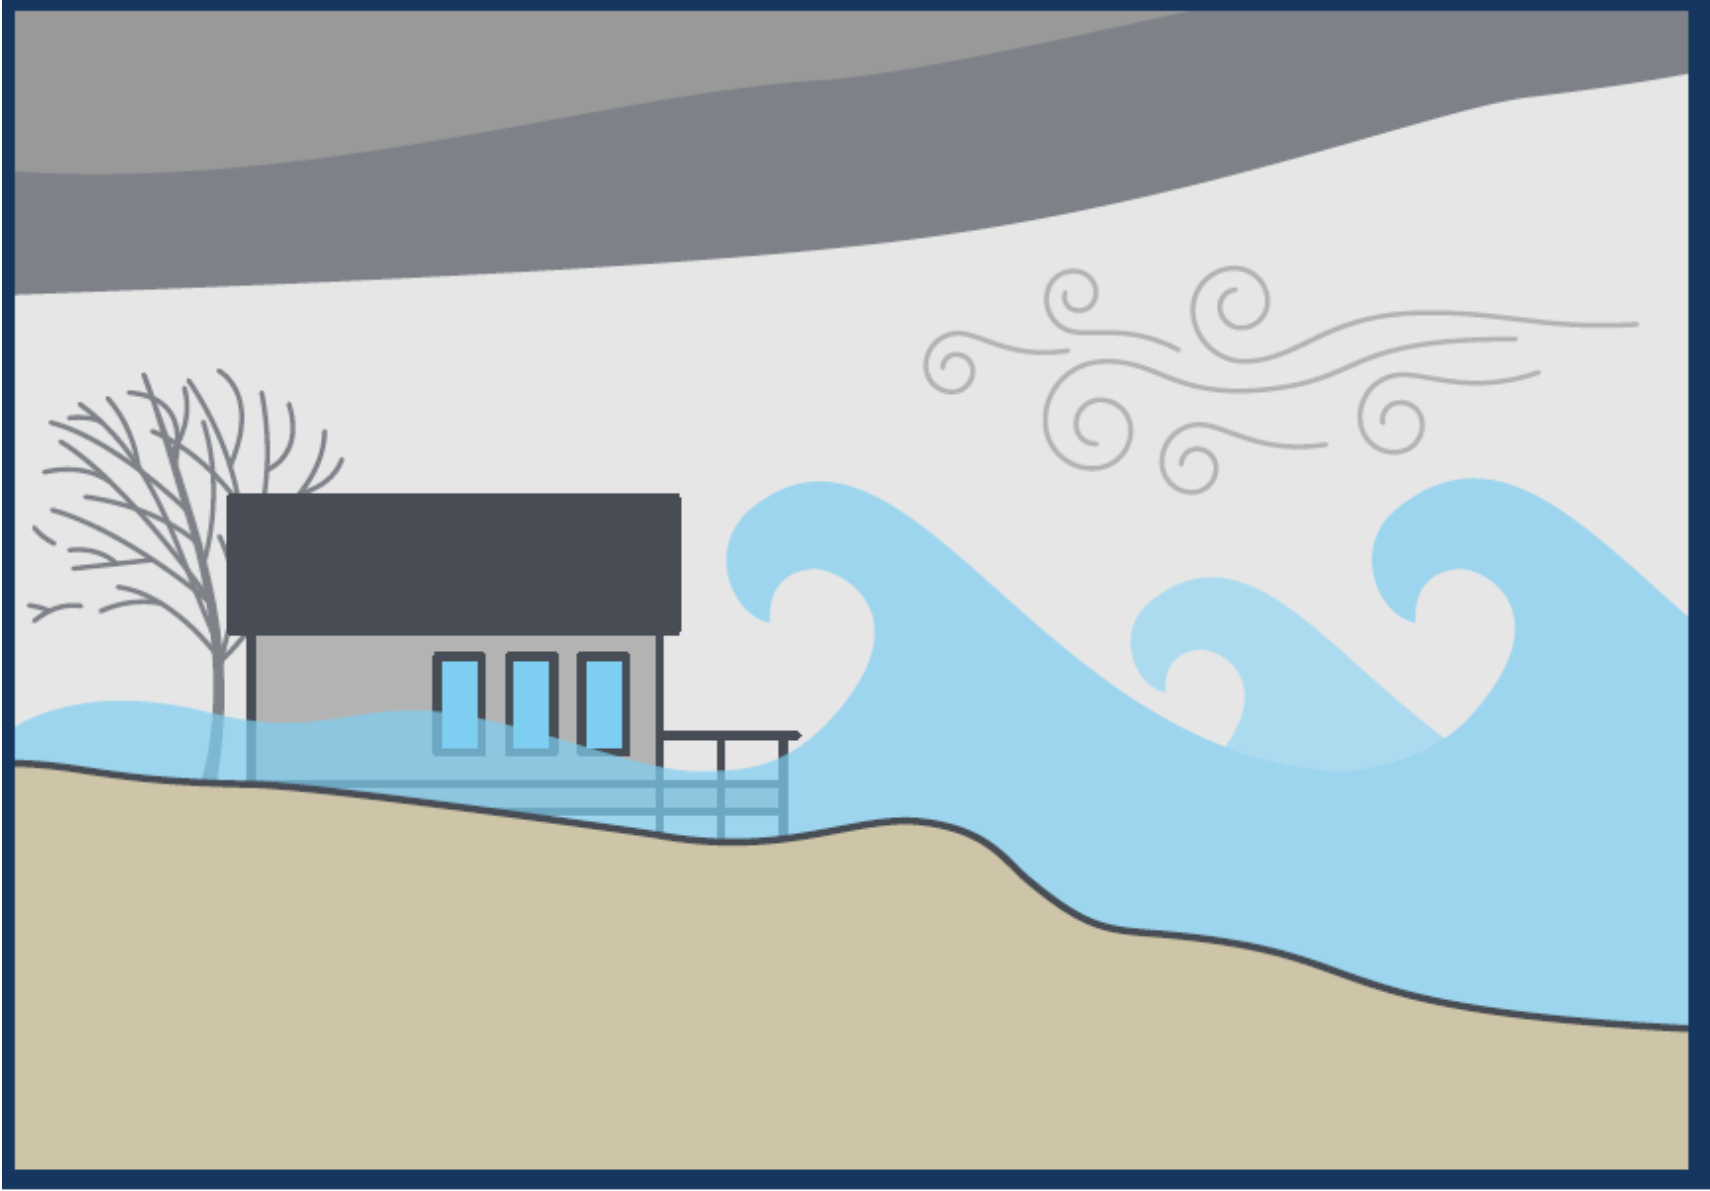 A home and tree is shown on a sandy slope. Wind is blowing water from the lake and coming in contact with the house.